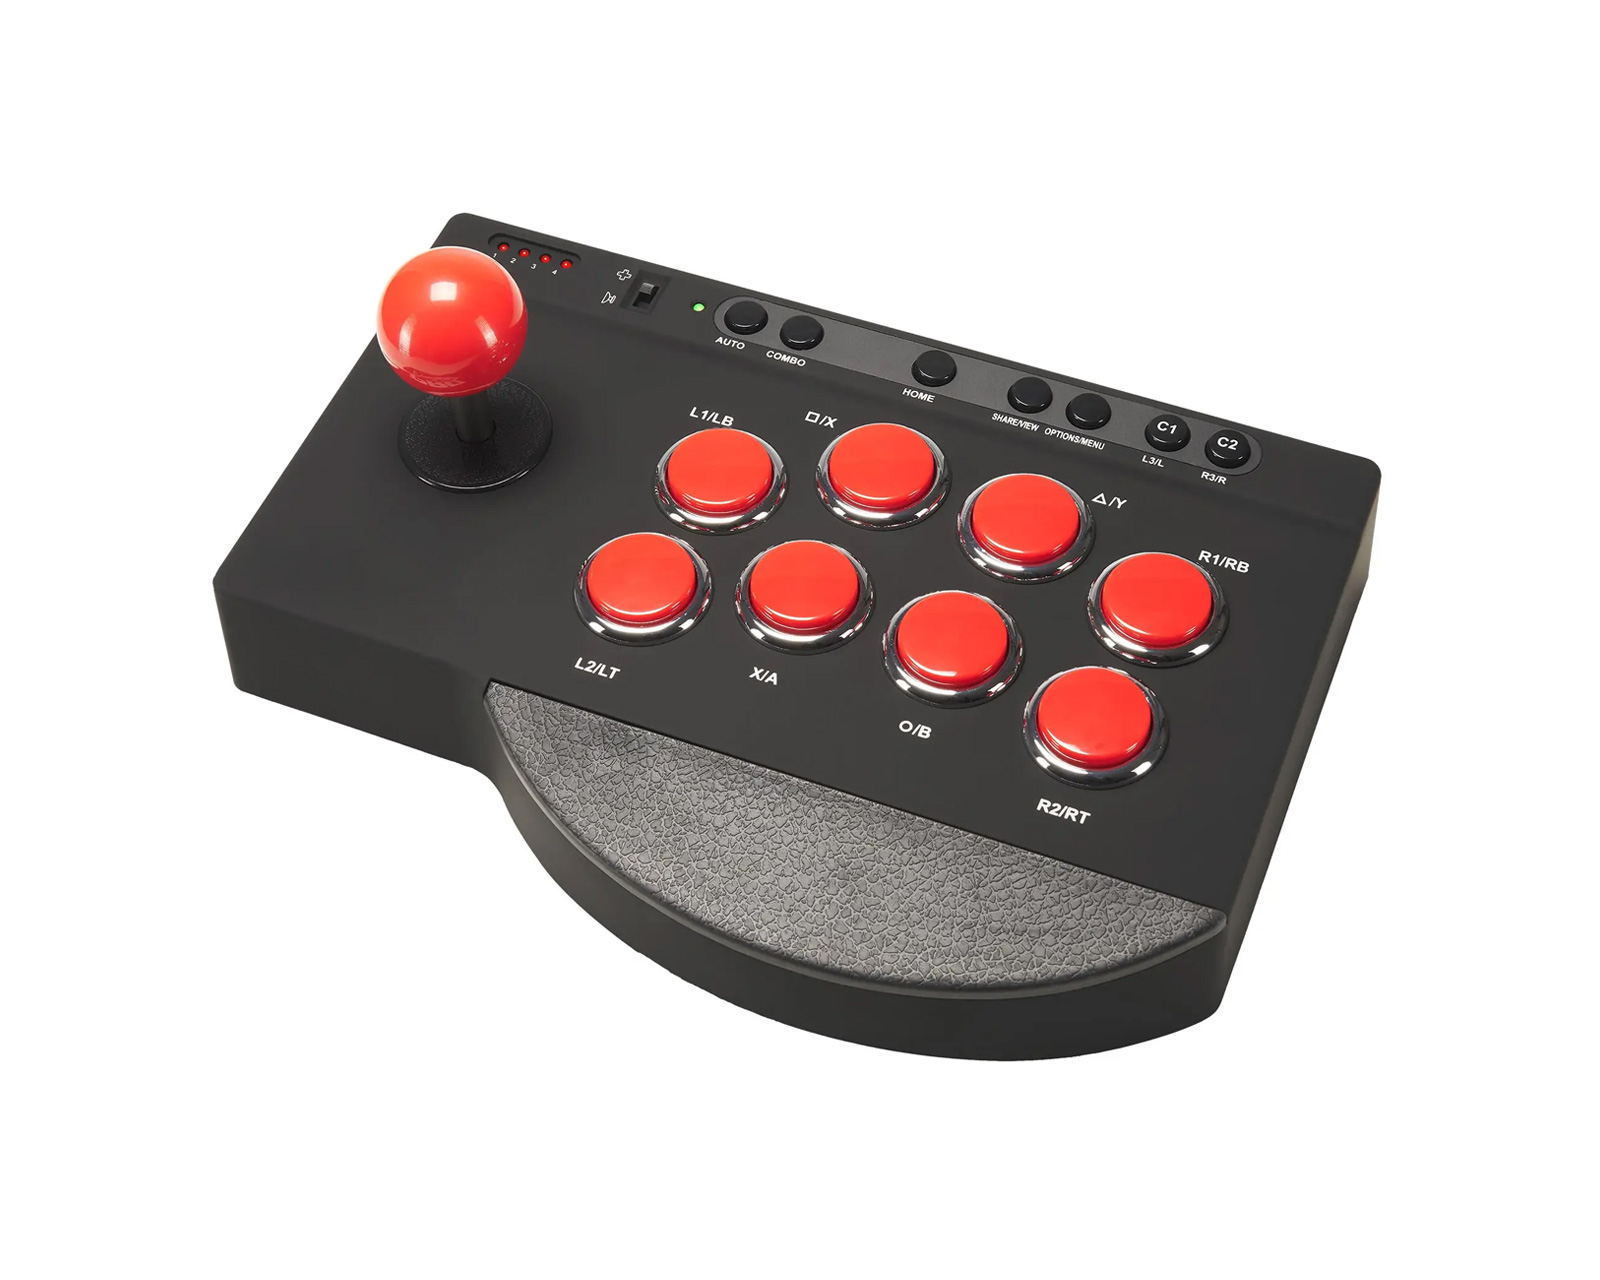 8BitDo Arcade Stick for Xbox has a simple yet powerful design